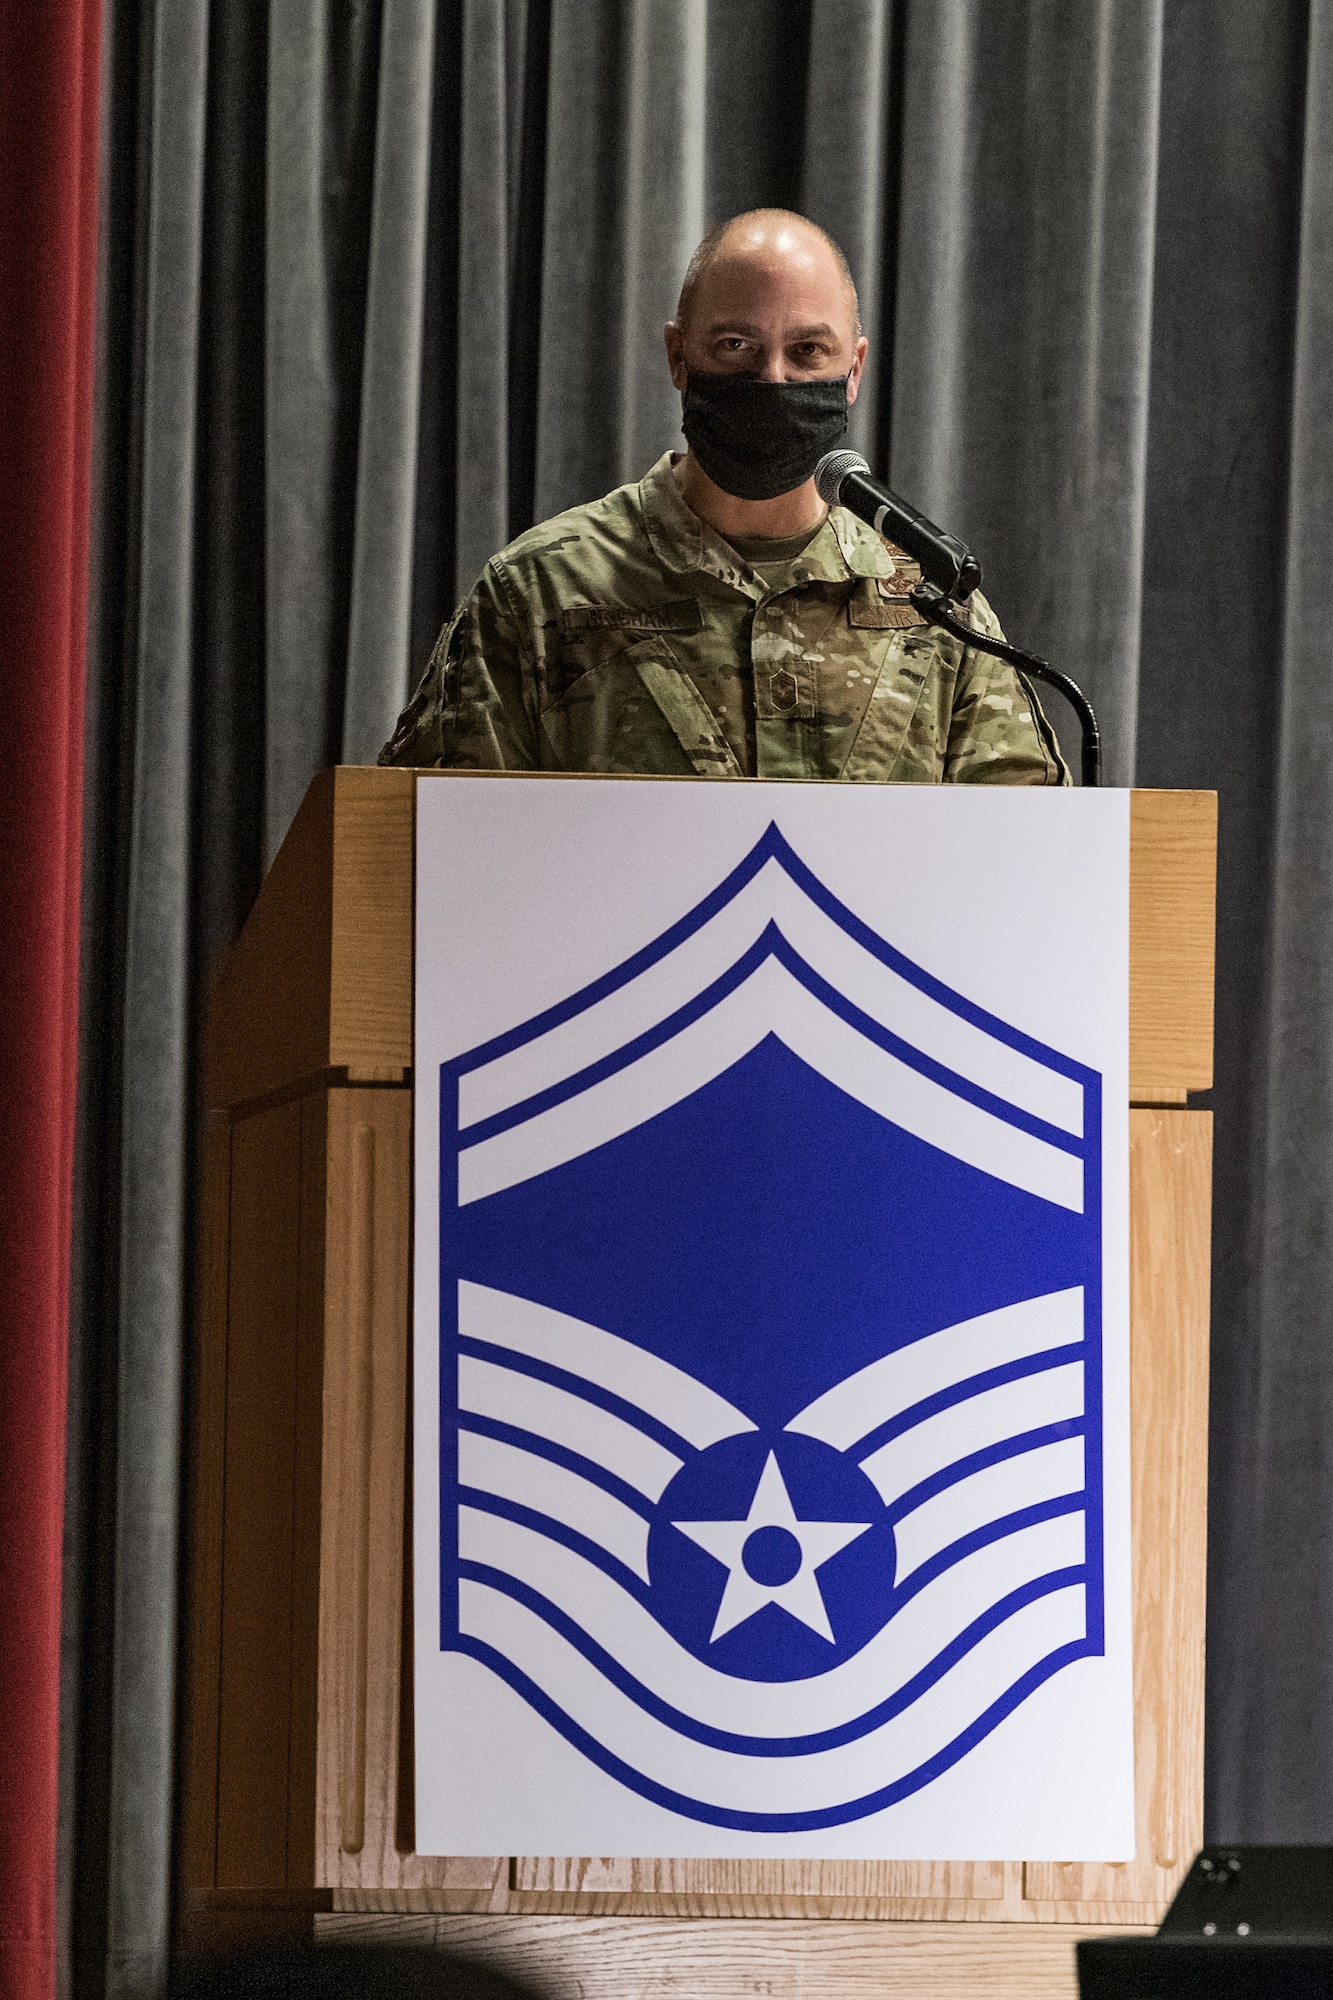 Chief Master Sgt. Jeremiah Grisham, 436th Airlift Wing interim command chief, makes opening remarks during the senior master sergeant promotion release ceremony held at the base theater on Dover Air Force Base, Delaware, March 26, 2021. Ten master sergeants at Dover AFB were selected for promotion to senior master sergeant in the 21E8 promotion cycle. (U.S. Air Force photo by Roland Balik)